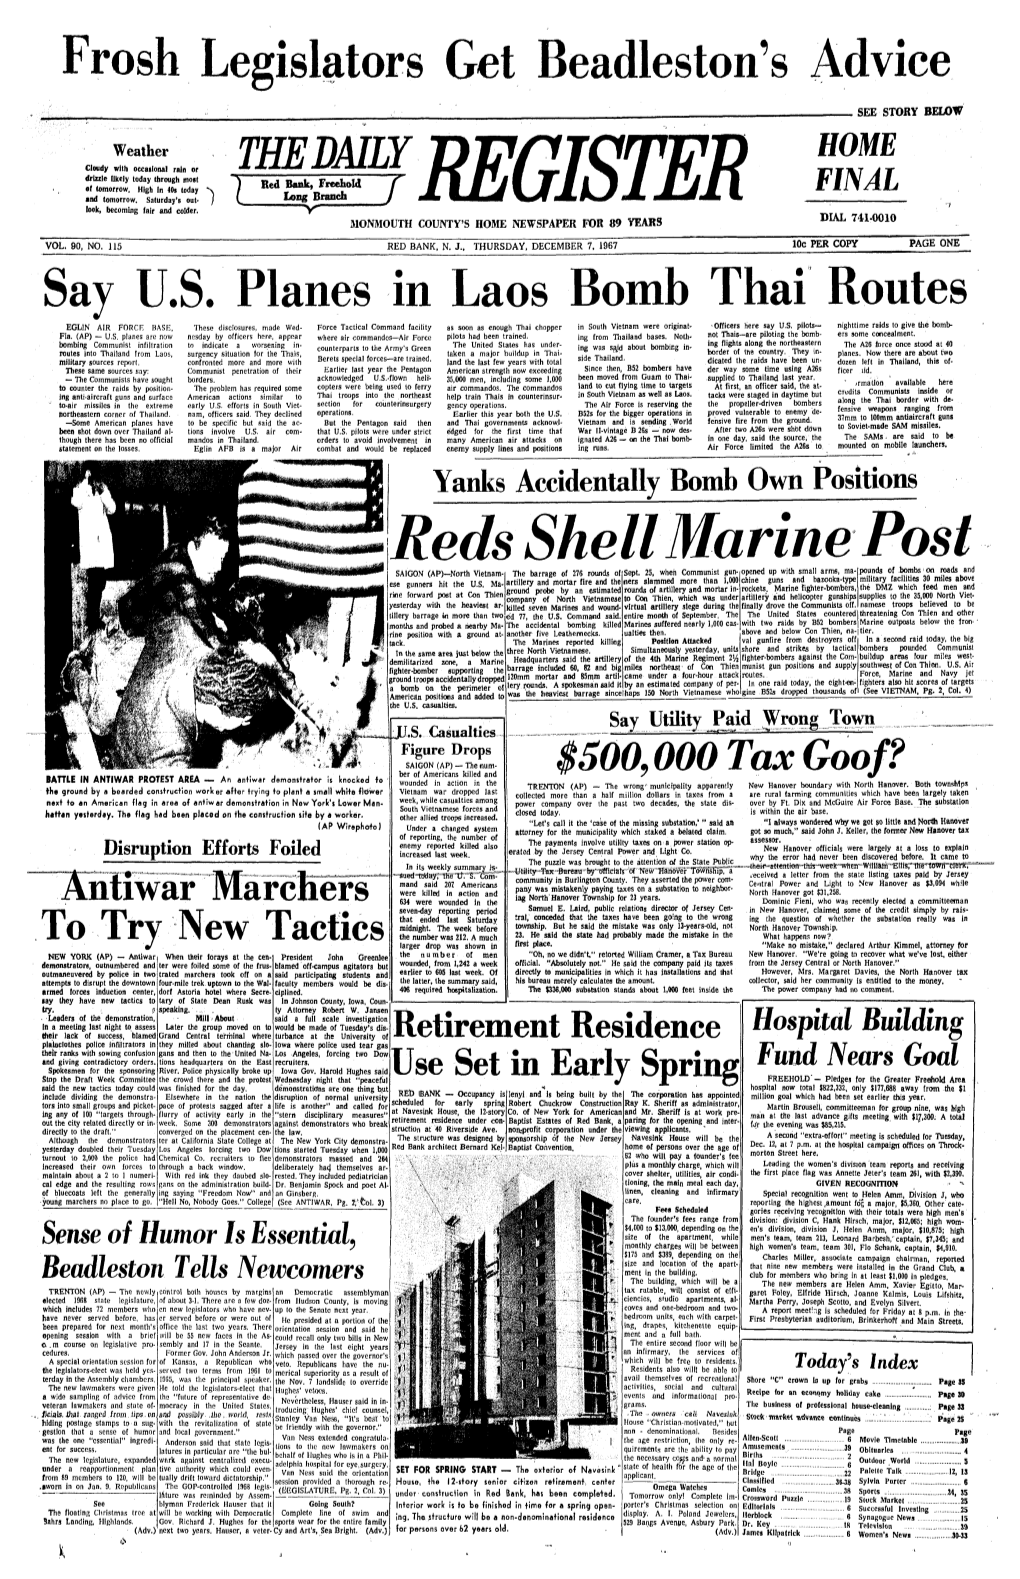 Reds Shell Marine Post; SAIGON (AP)-North Vietnam- the Barrage of 276 Rounds of Sept